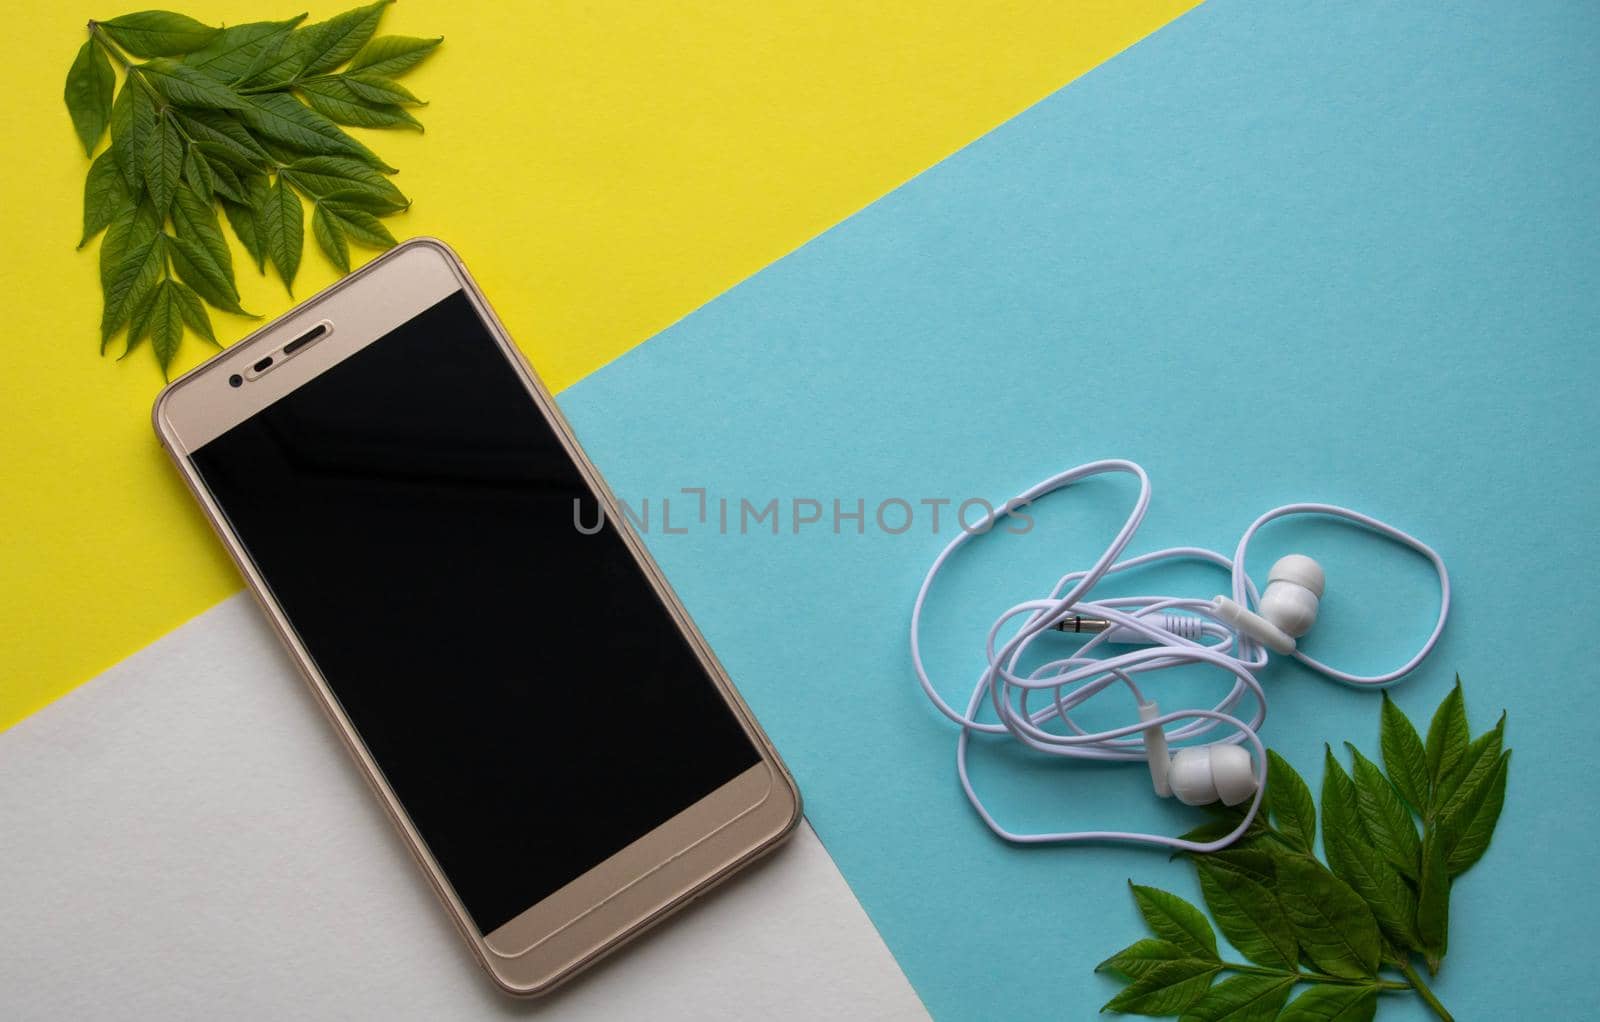 A Golden smartphone with a blank screen and headphones isolated on a white yellow and blue background with green leaves by lapushka62